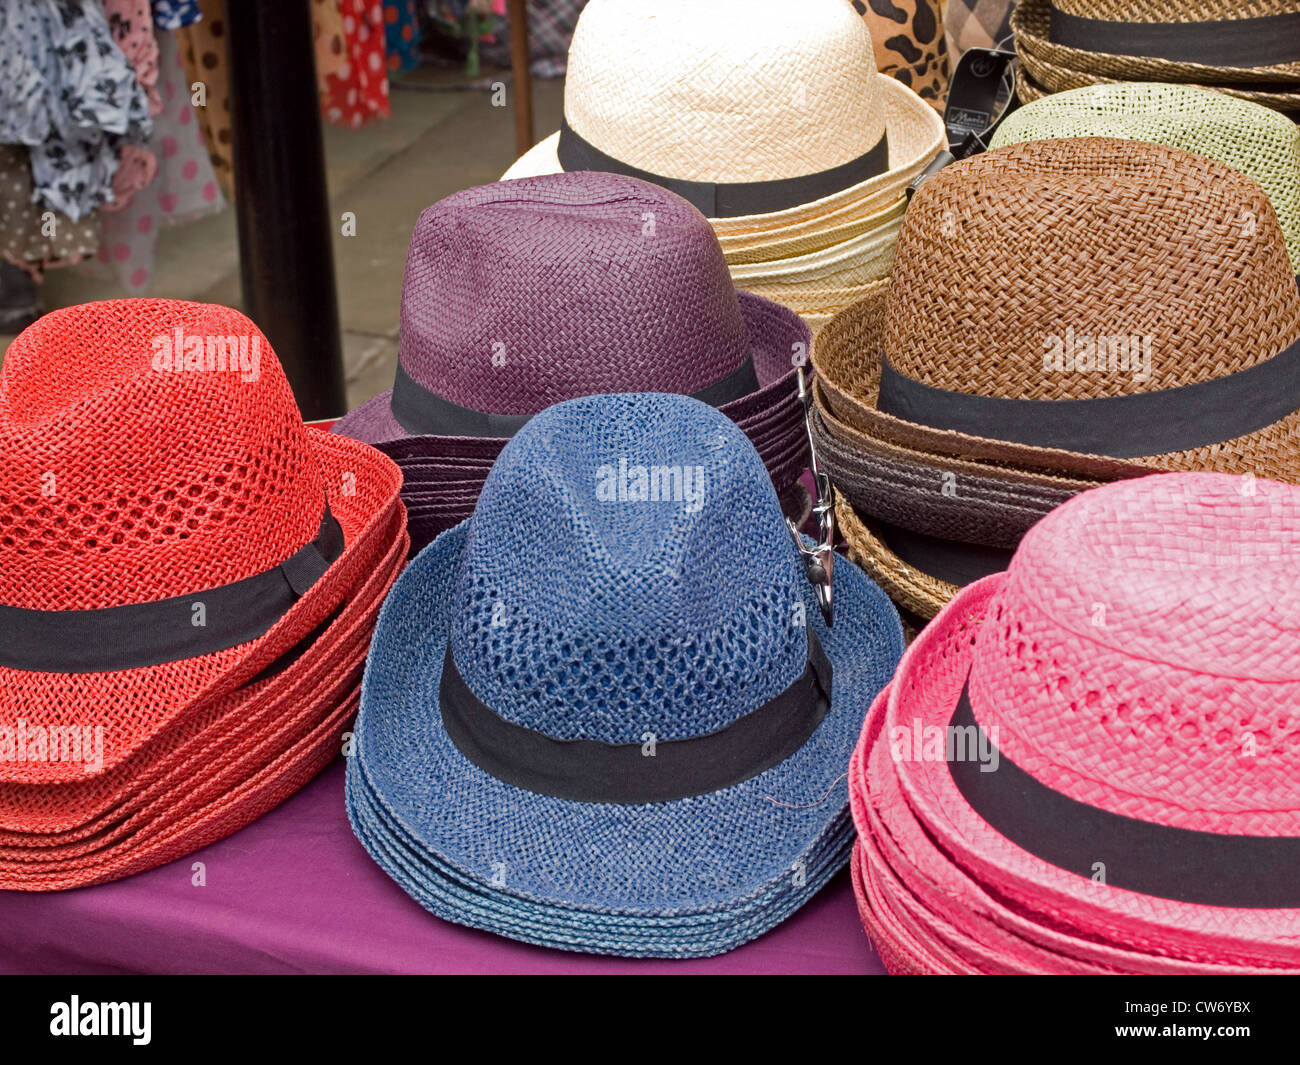 colourful colorful straw hats Stock Photo